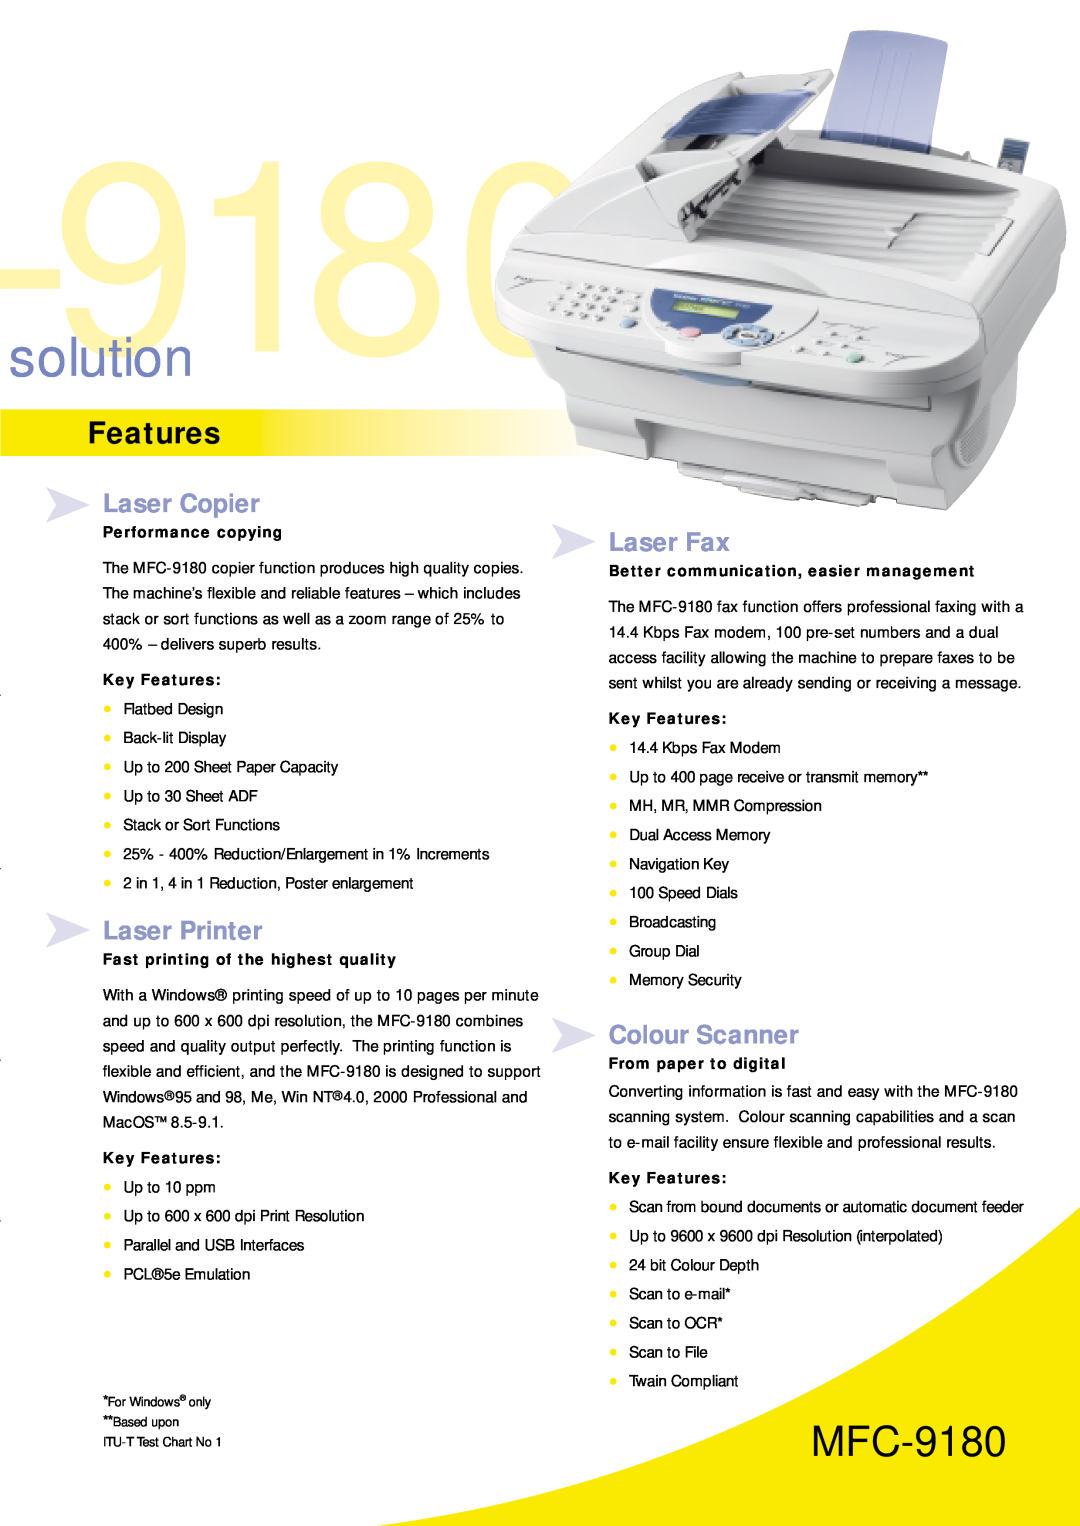 Brother MFC-9180 manual solution, Features, Laser Copier, Laser Printer, Laser Fax, Colour Scanner, Performance copying 